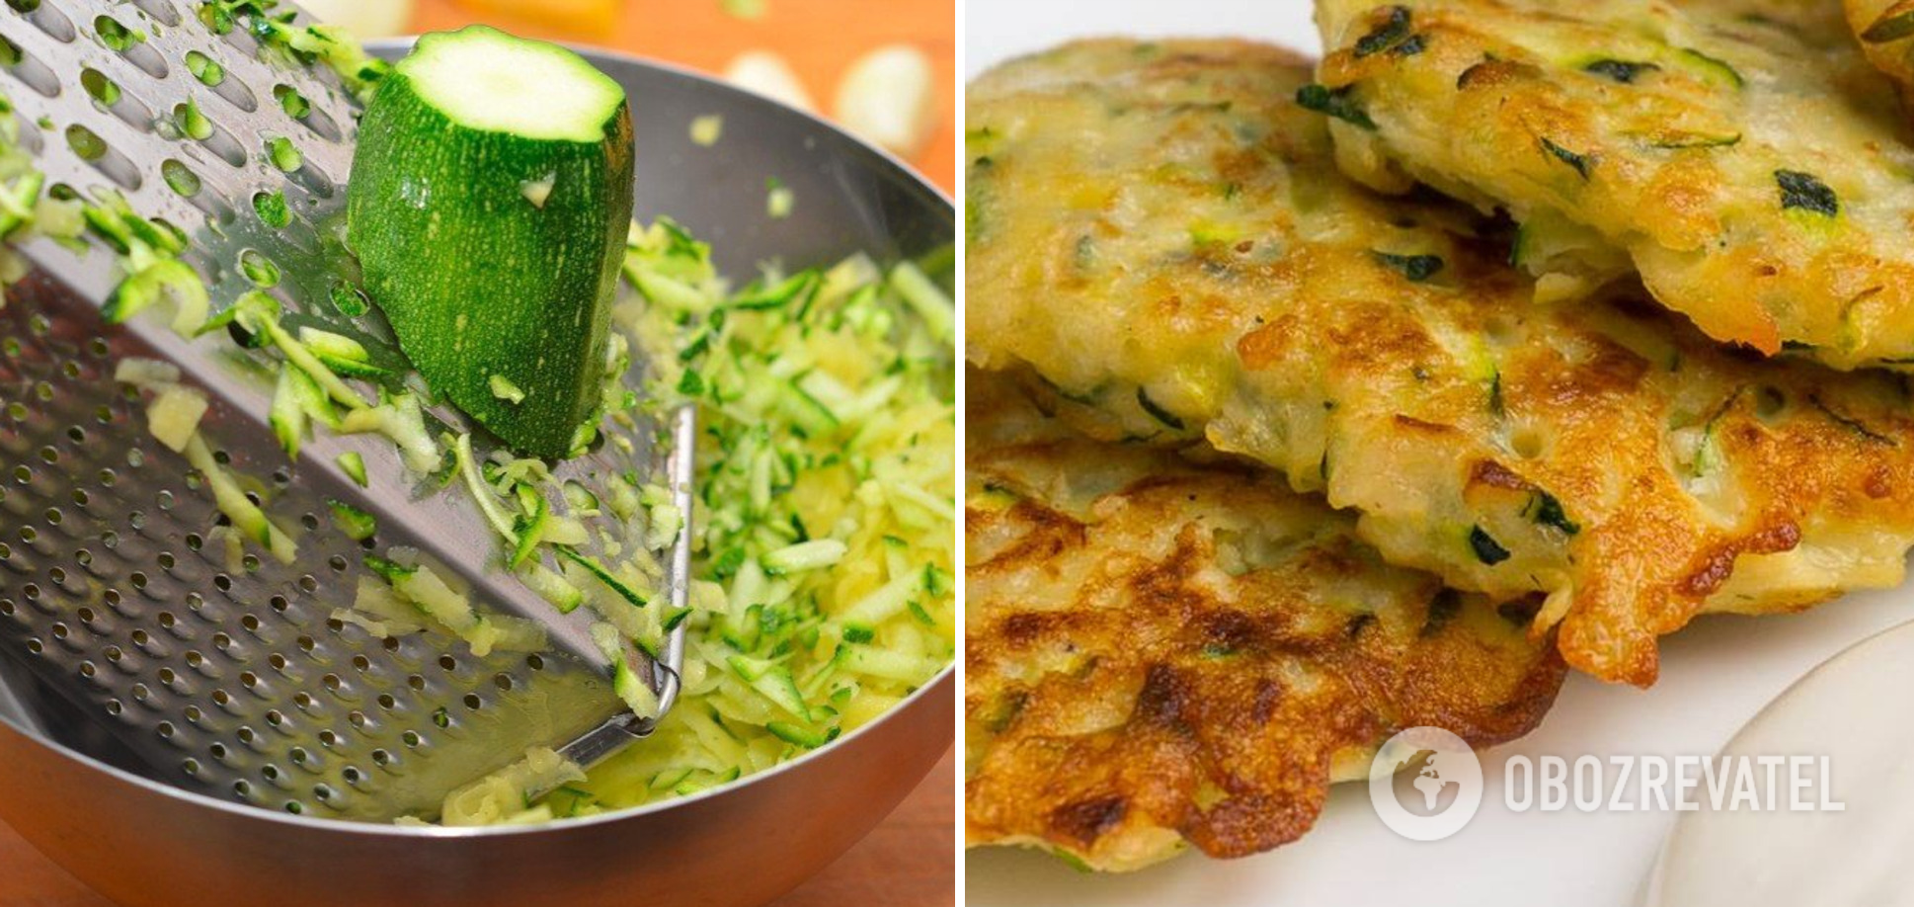 What to make from zucchini